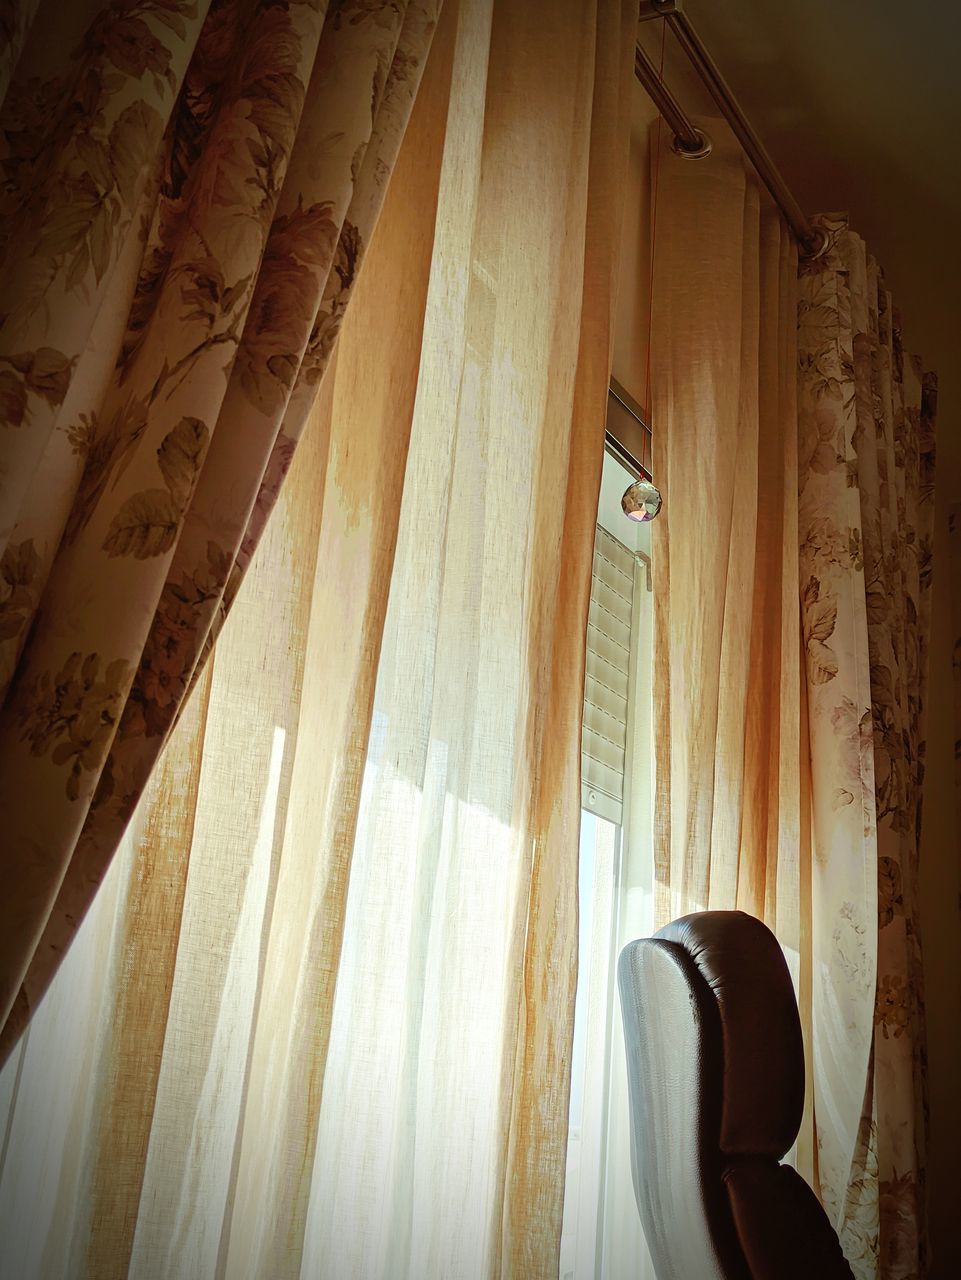 LOW ANGLE VIEW OF CURTAIN HANGING IN HOUSE